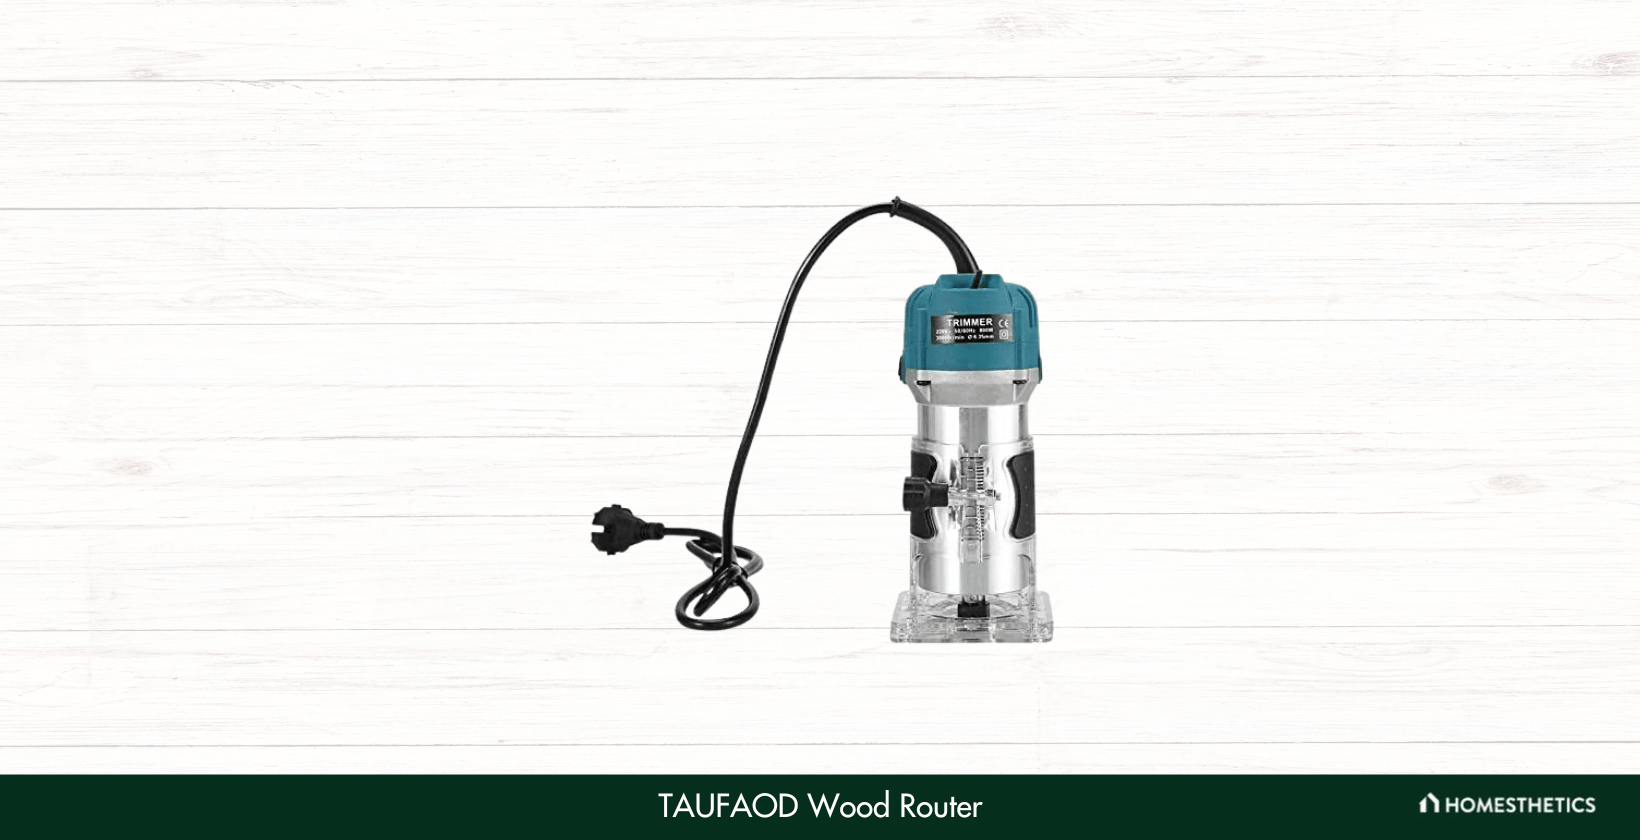 11. TAUFAOD Wood Router